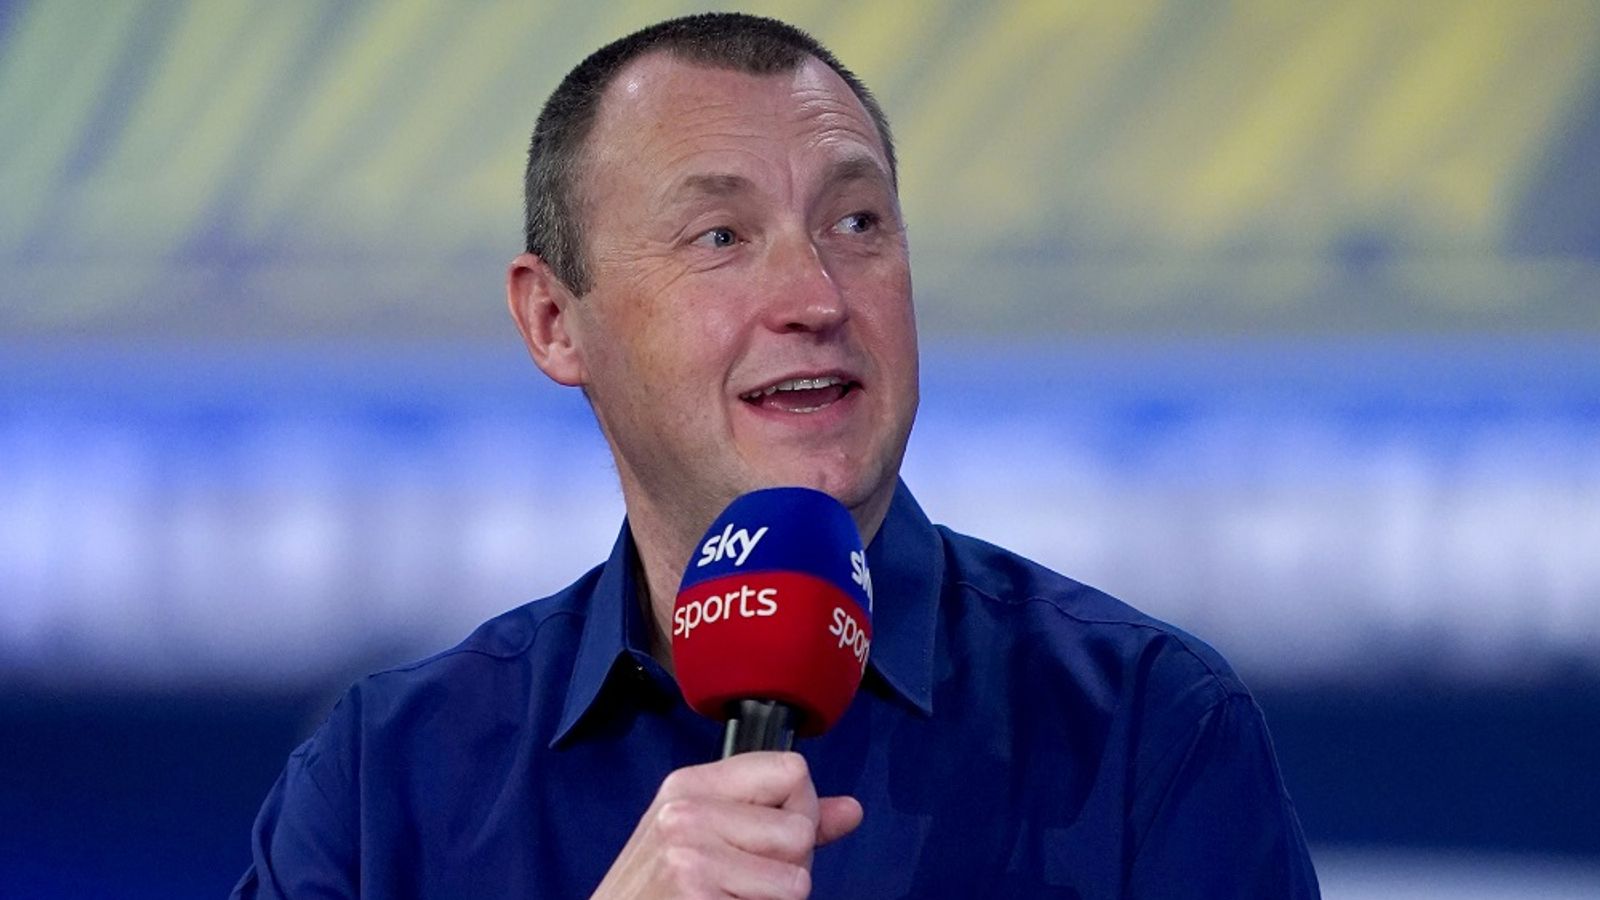 Wayne Mardle: Enthusiastic Sky Sports Darts commentator misses final after shouting so loudly that he lost his voice